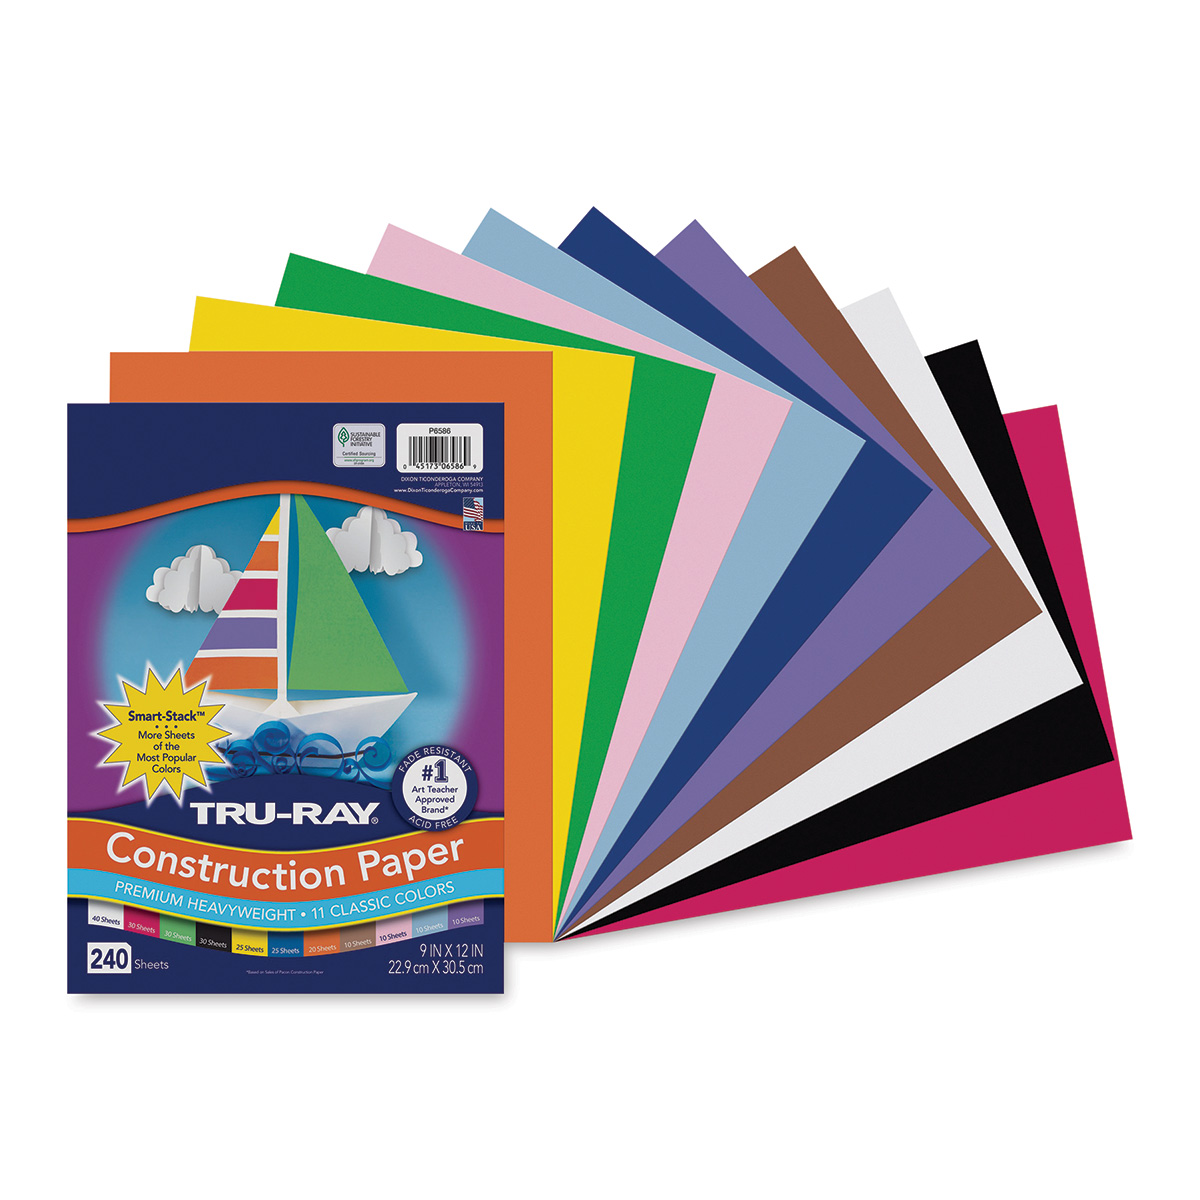 Tru-Ray Construction Paper, White, 24 x 36, 50 Sheets